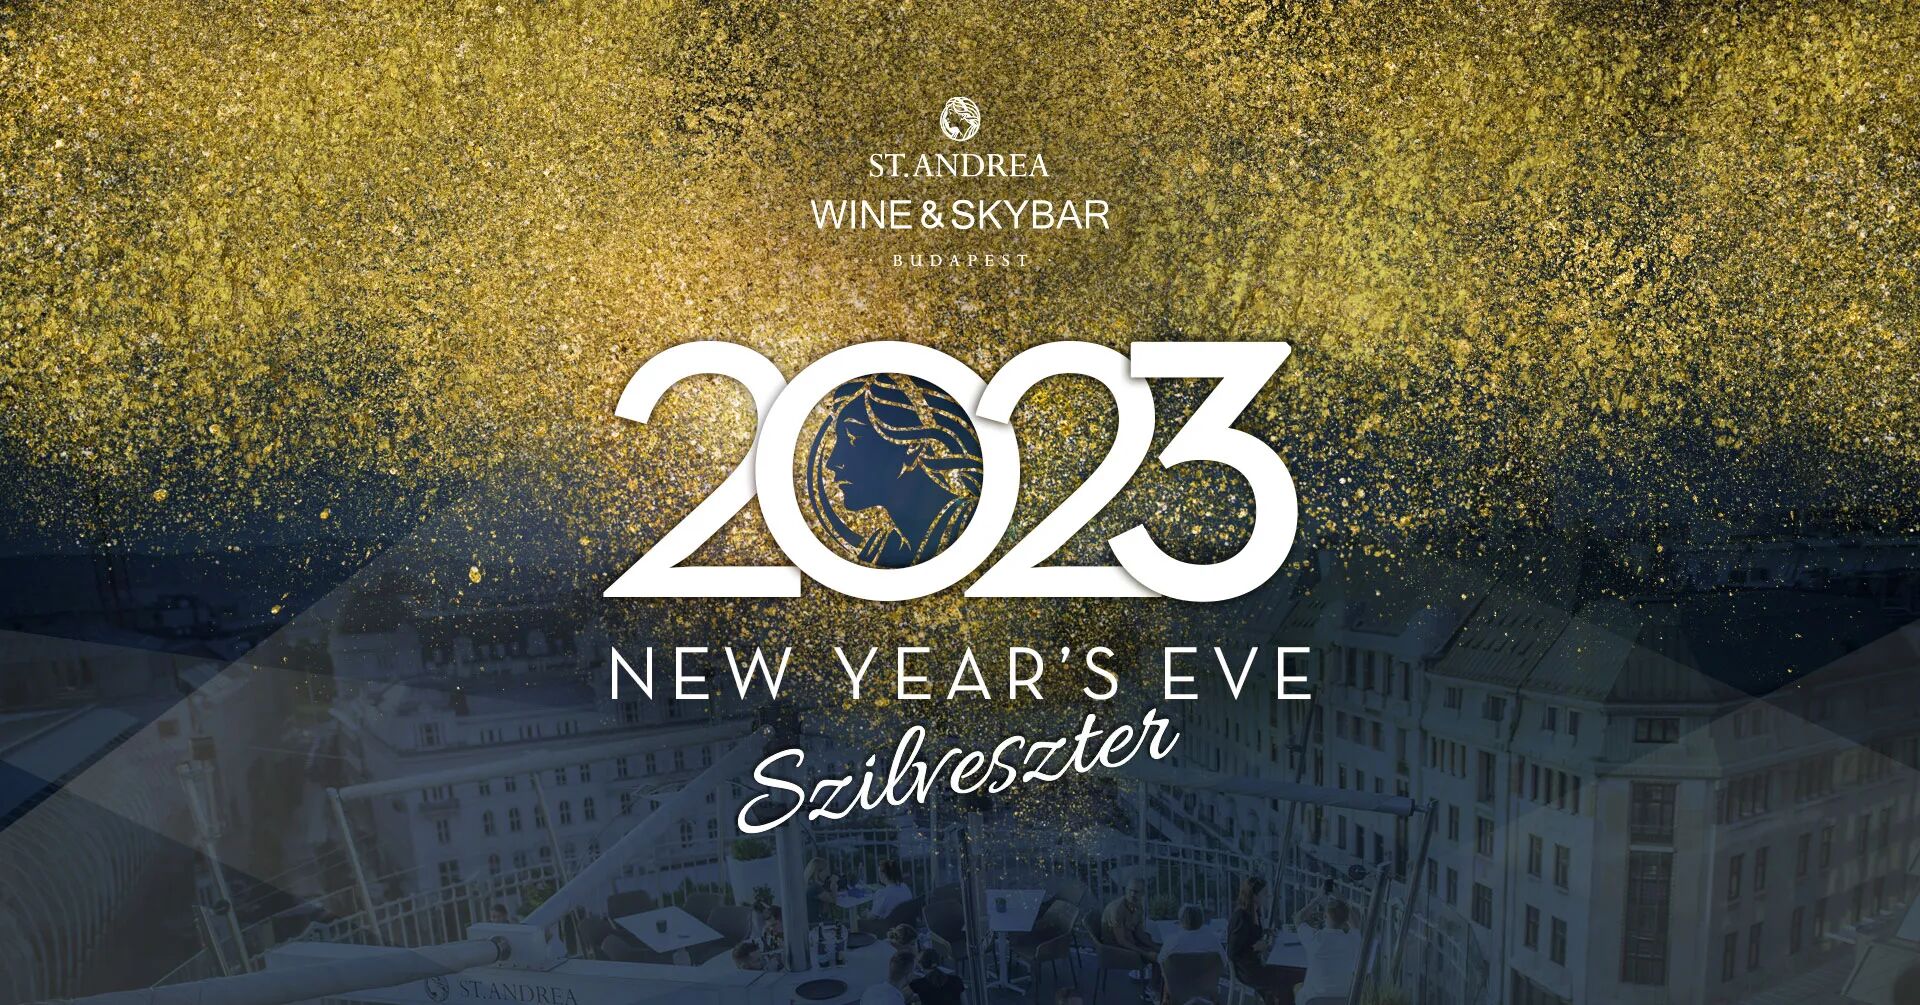 NEW YEAR'S EVE at ST. ANDREA WINE & SKYBAR